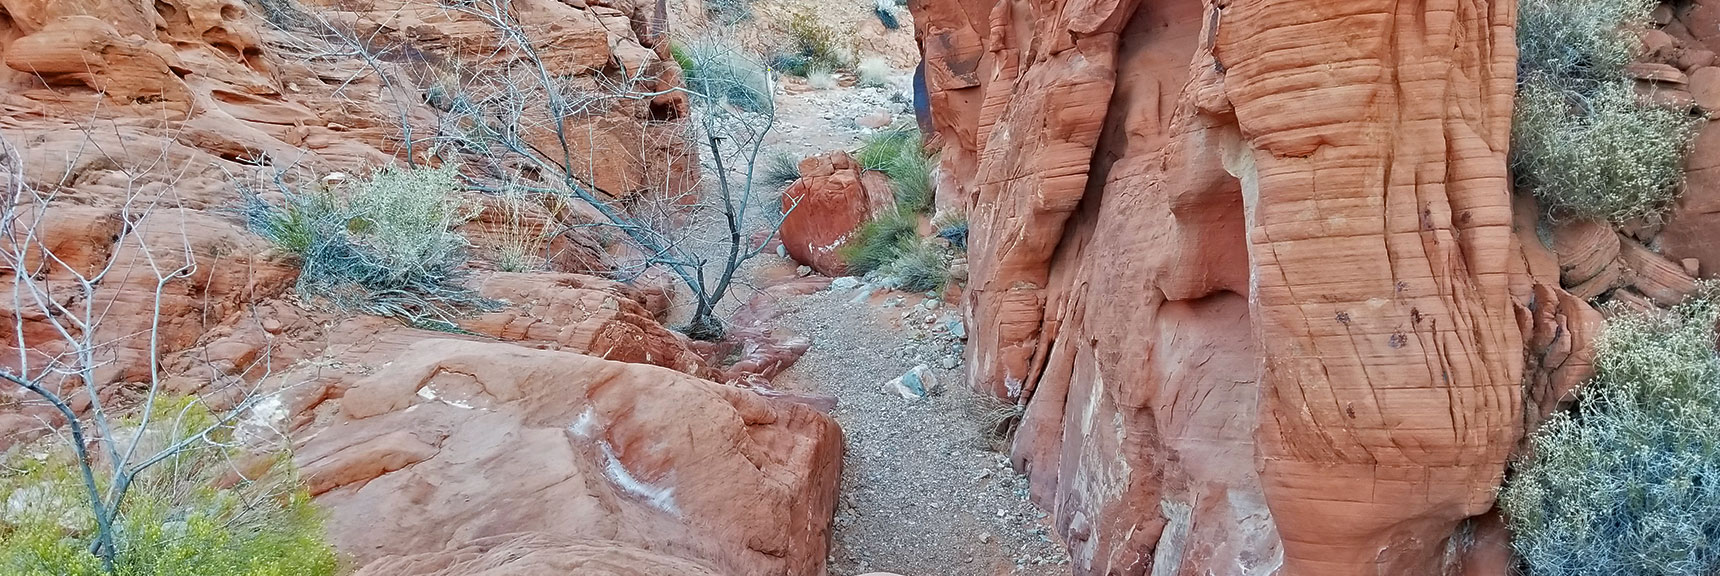 Descending into the Northern Canyon Wash on Prospect Trail in Valley of Fire State Park, Nevada